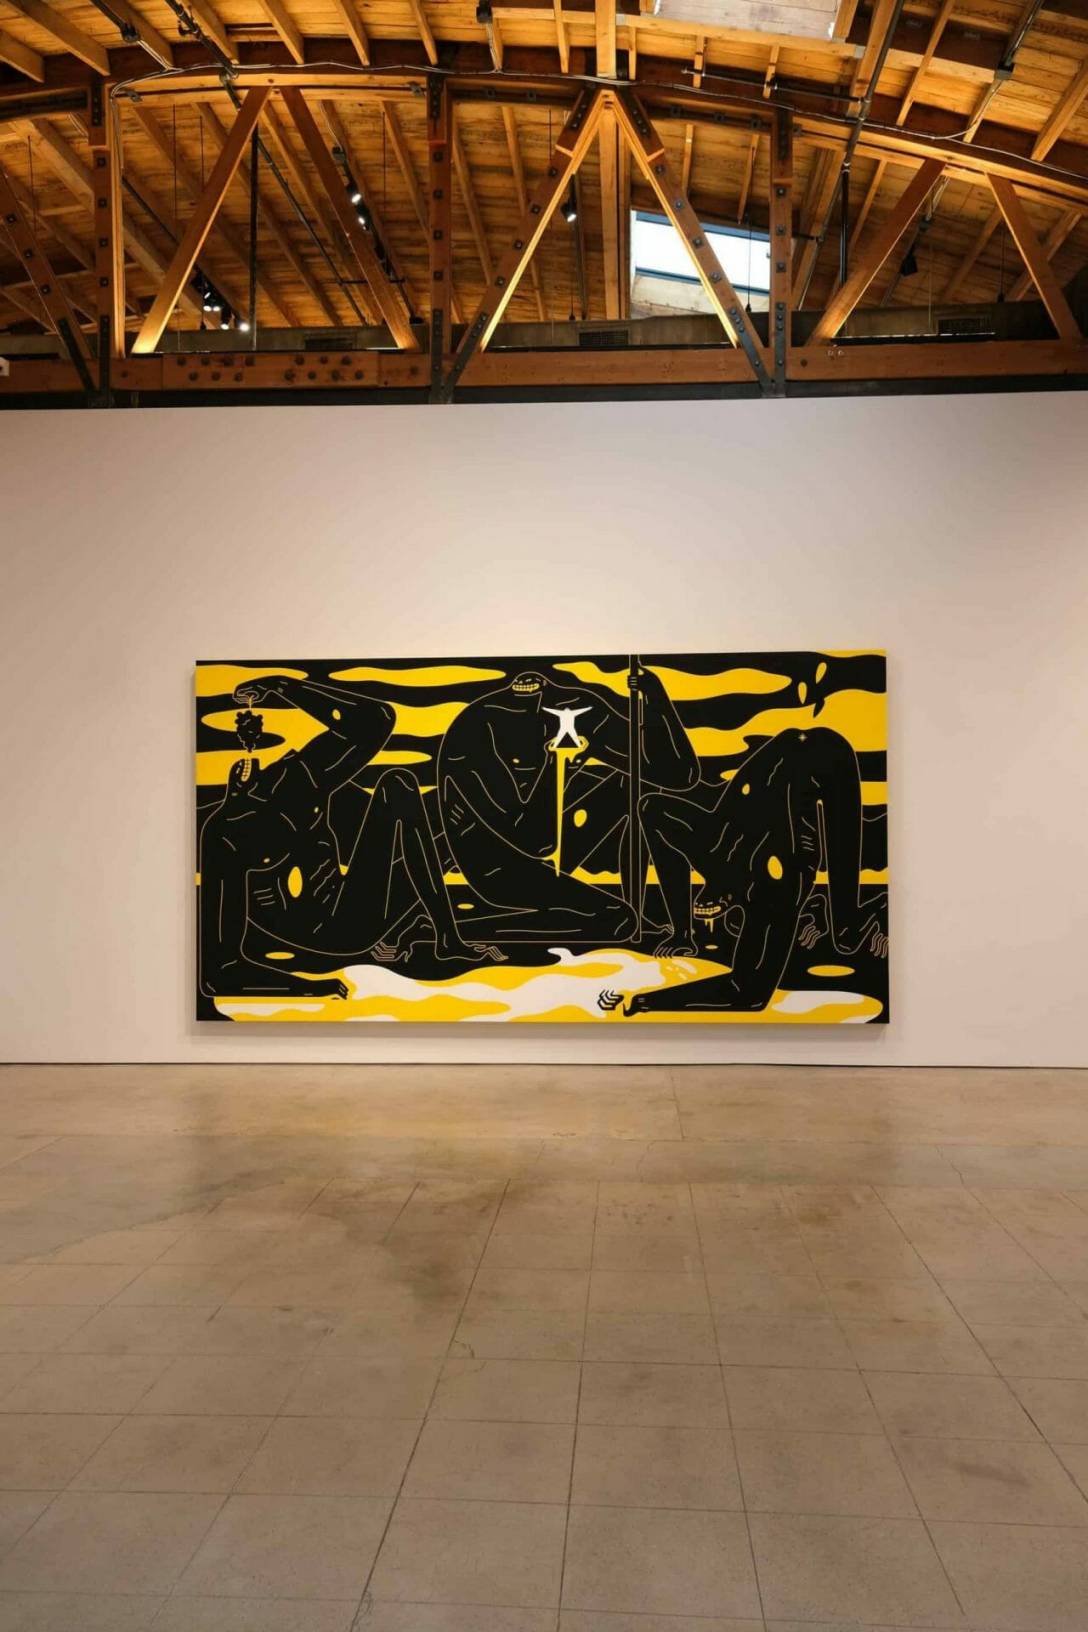 Artist-Cleon-Peterson.-Image-credit-Mike-Von.-scaled (1)